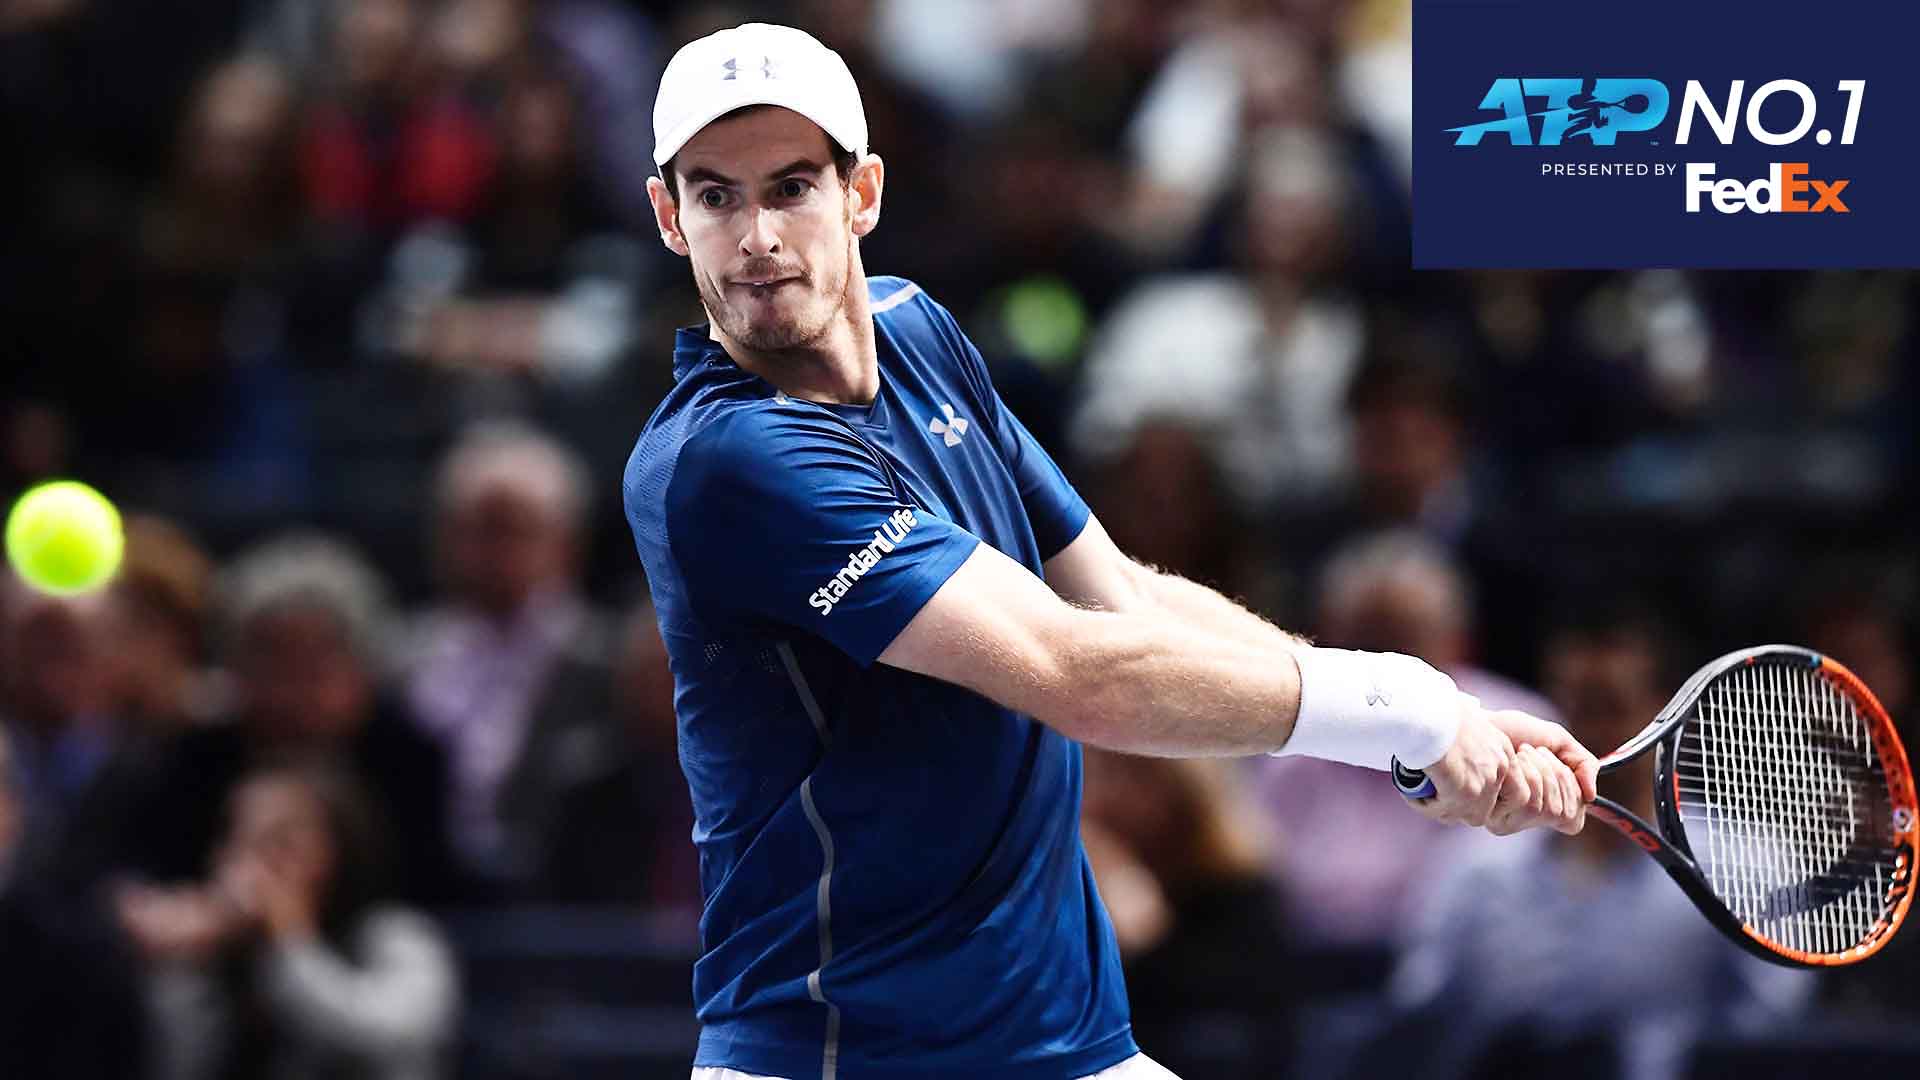 Andy Murray began his 41-week reign at the top of the FedEx ATP Rankings after lifting his maiden Rolex Paris Masters trophy in 2016.